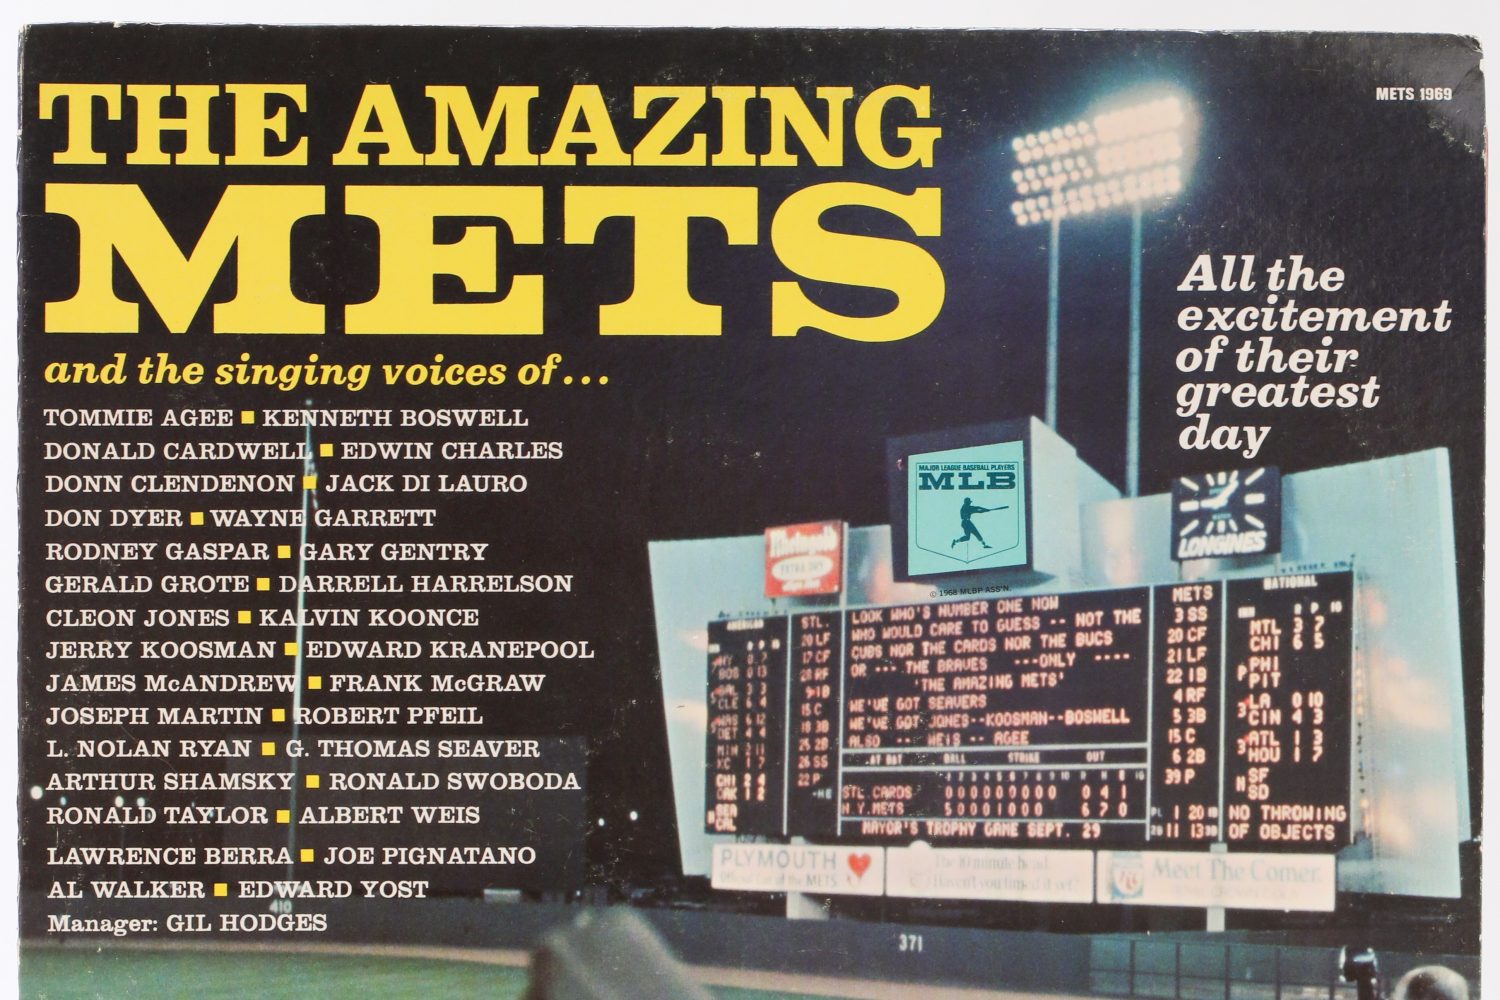 The Amazing Mets LP from 1969